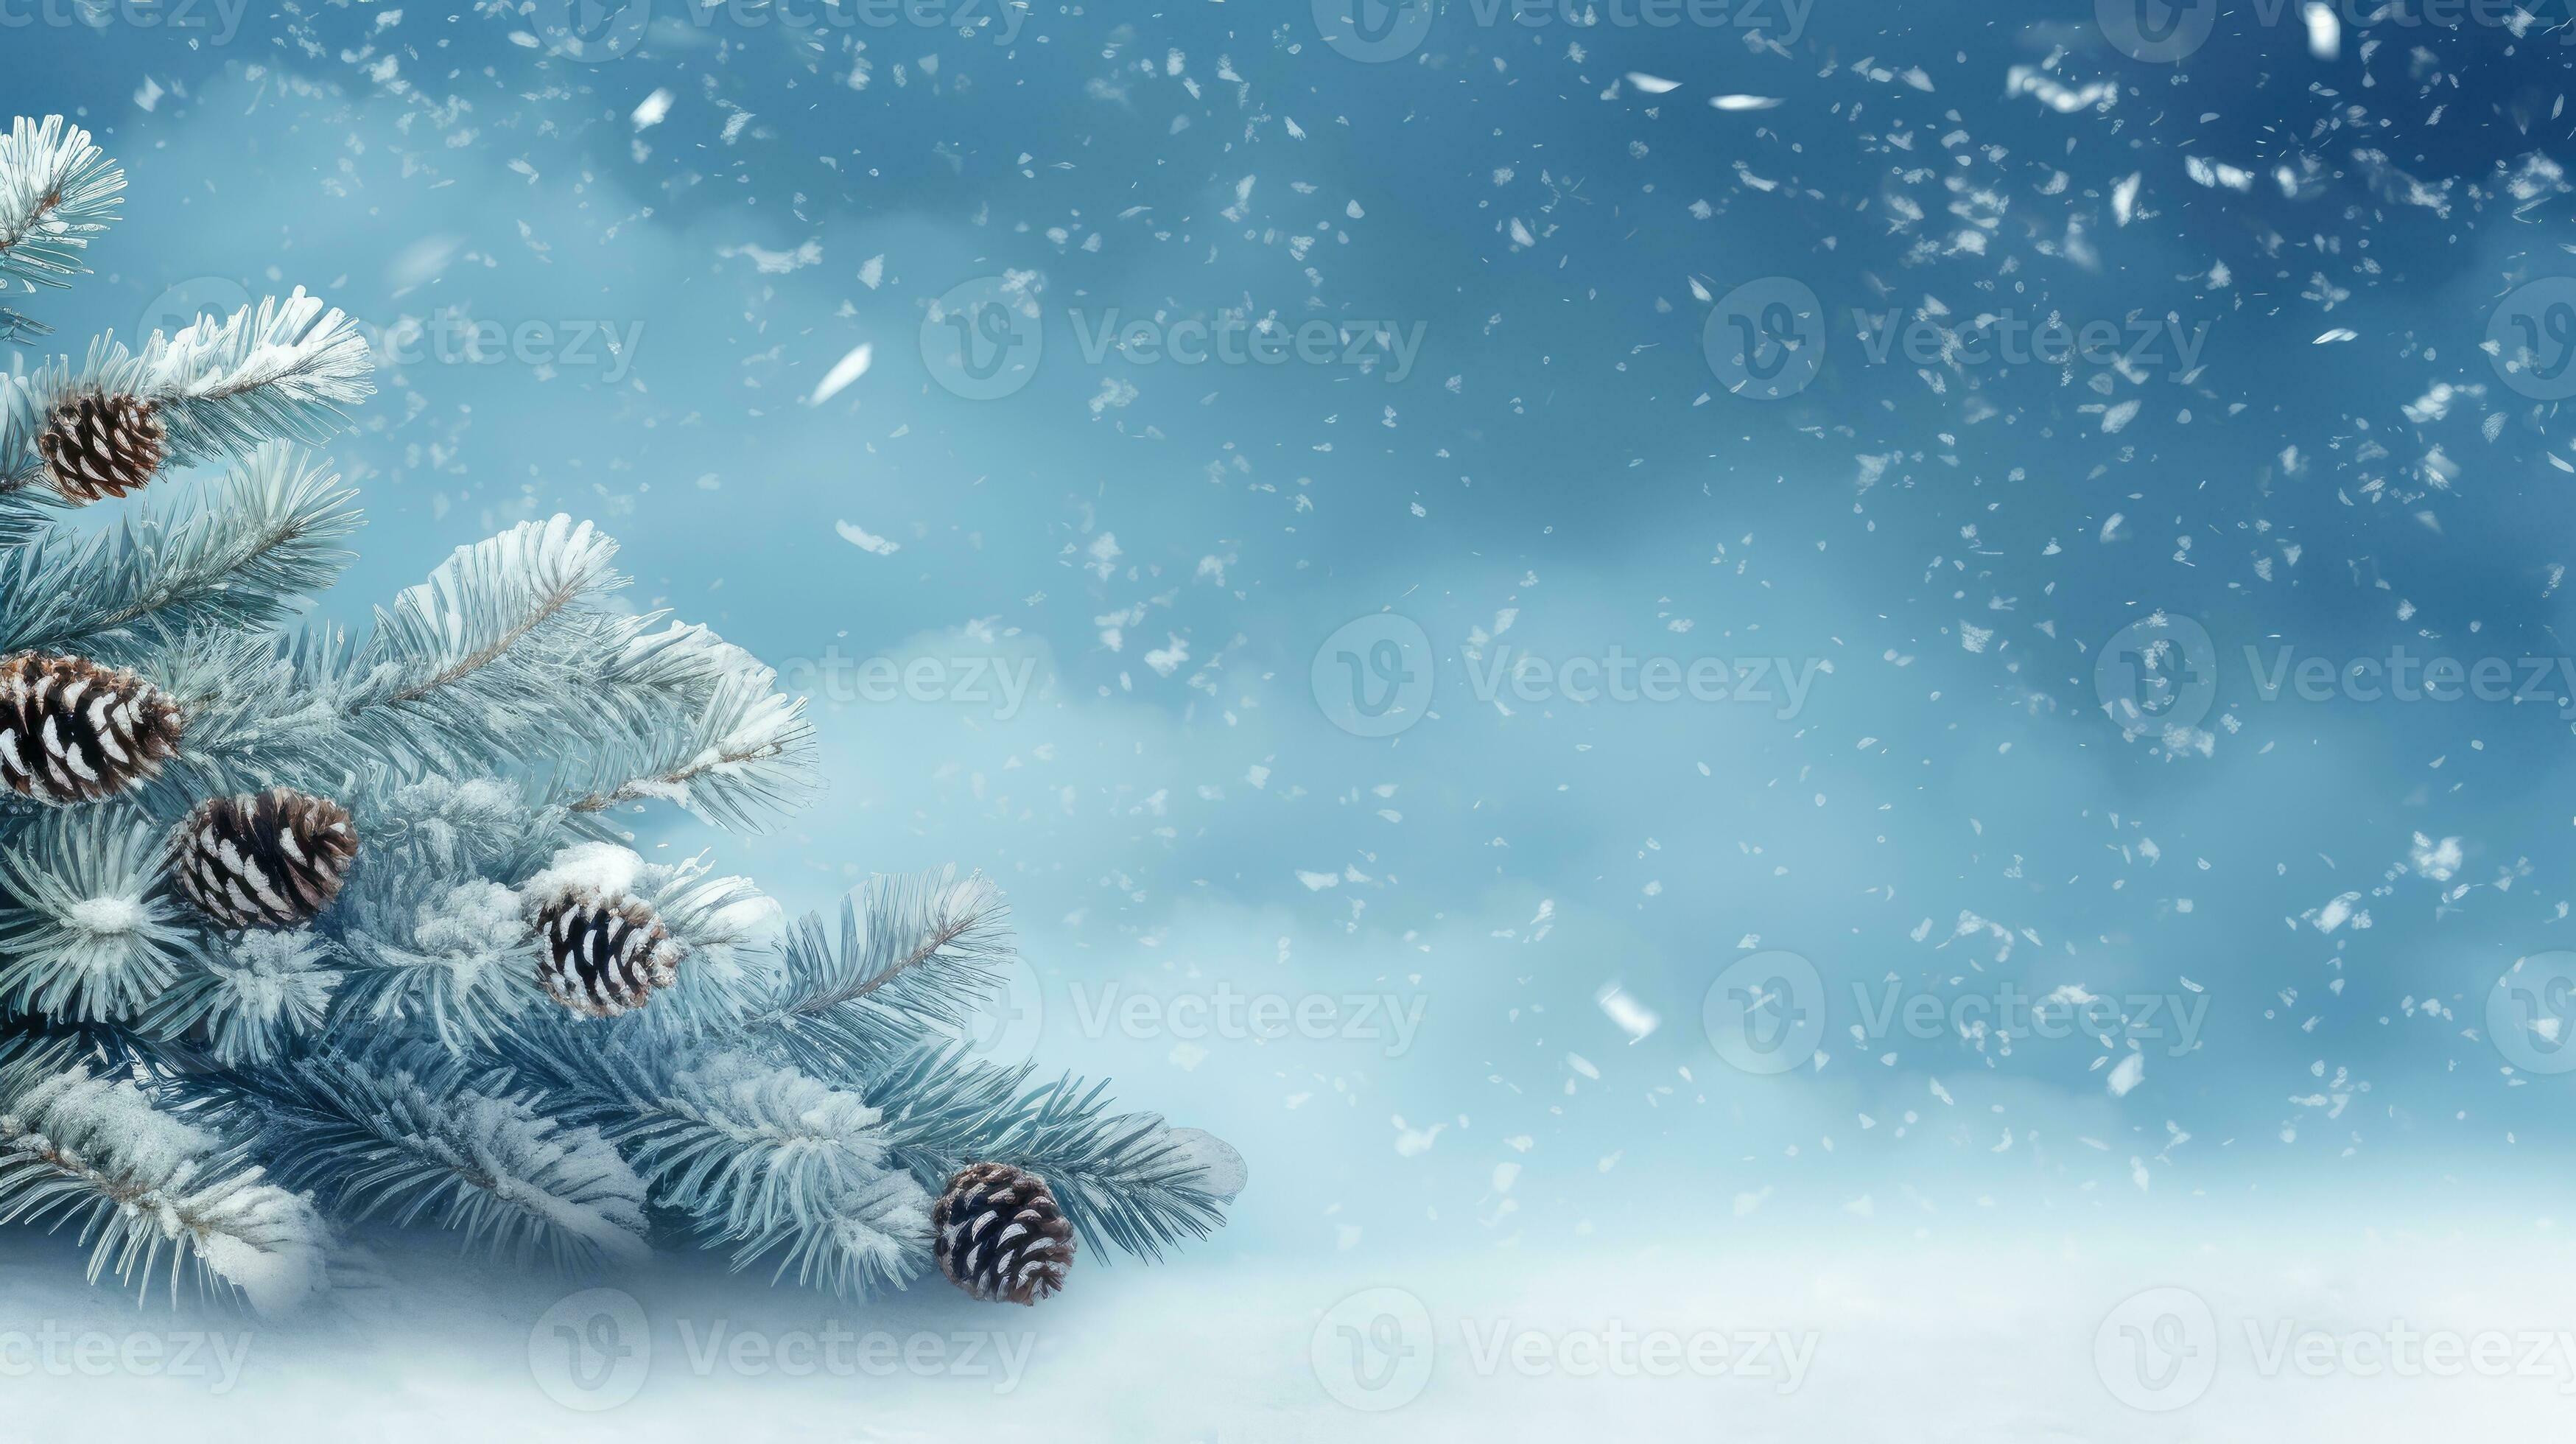 Winter background of snow and frost with pine trees, free space